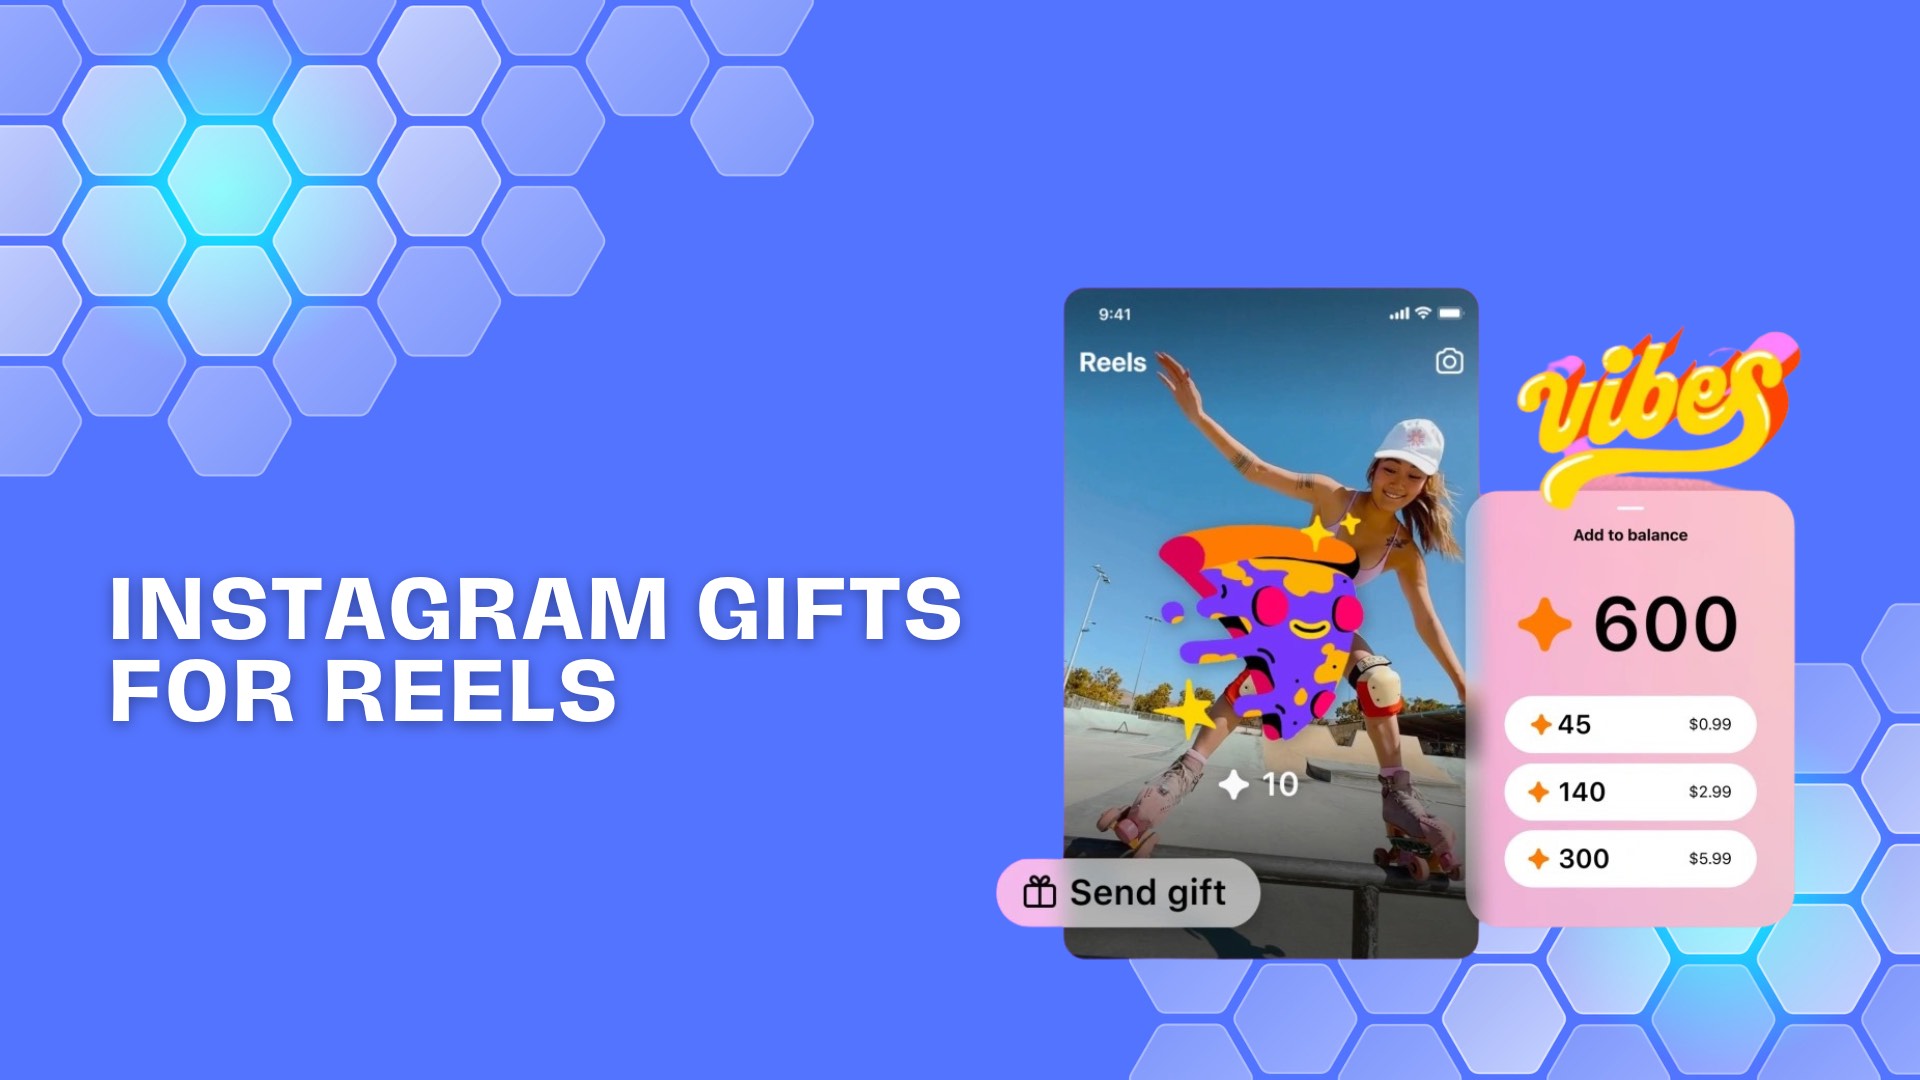 IG Gifts for Reels: How Creators Can Earn More with Instagram Gifts